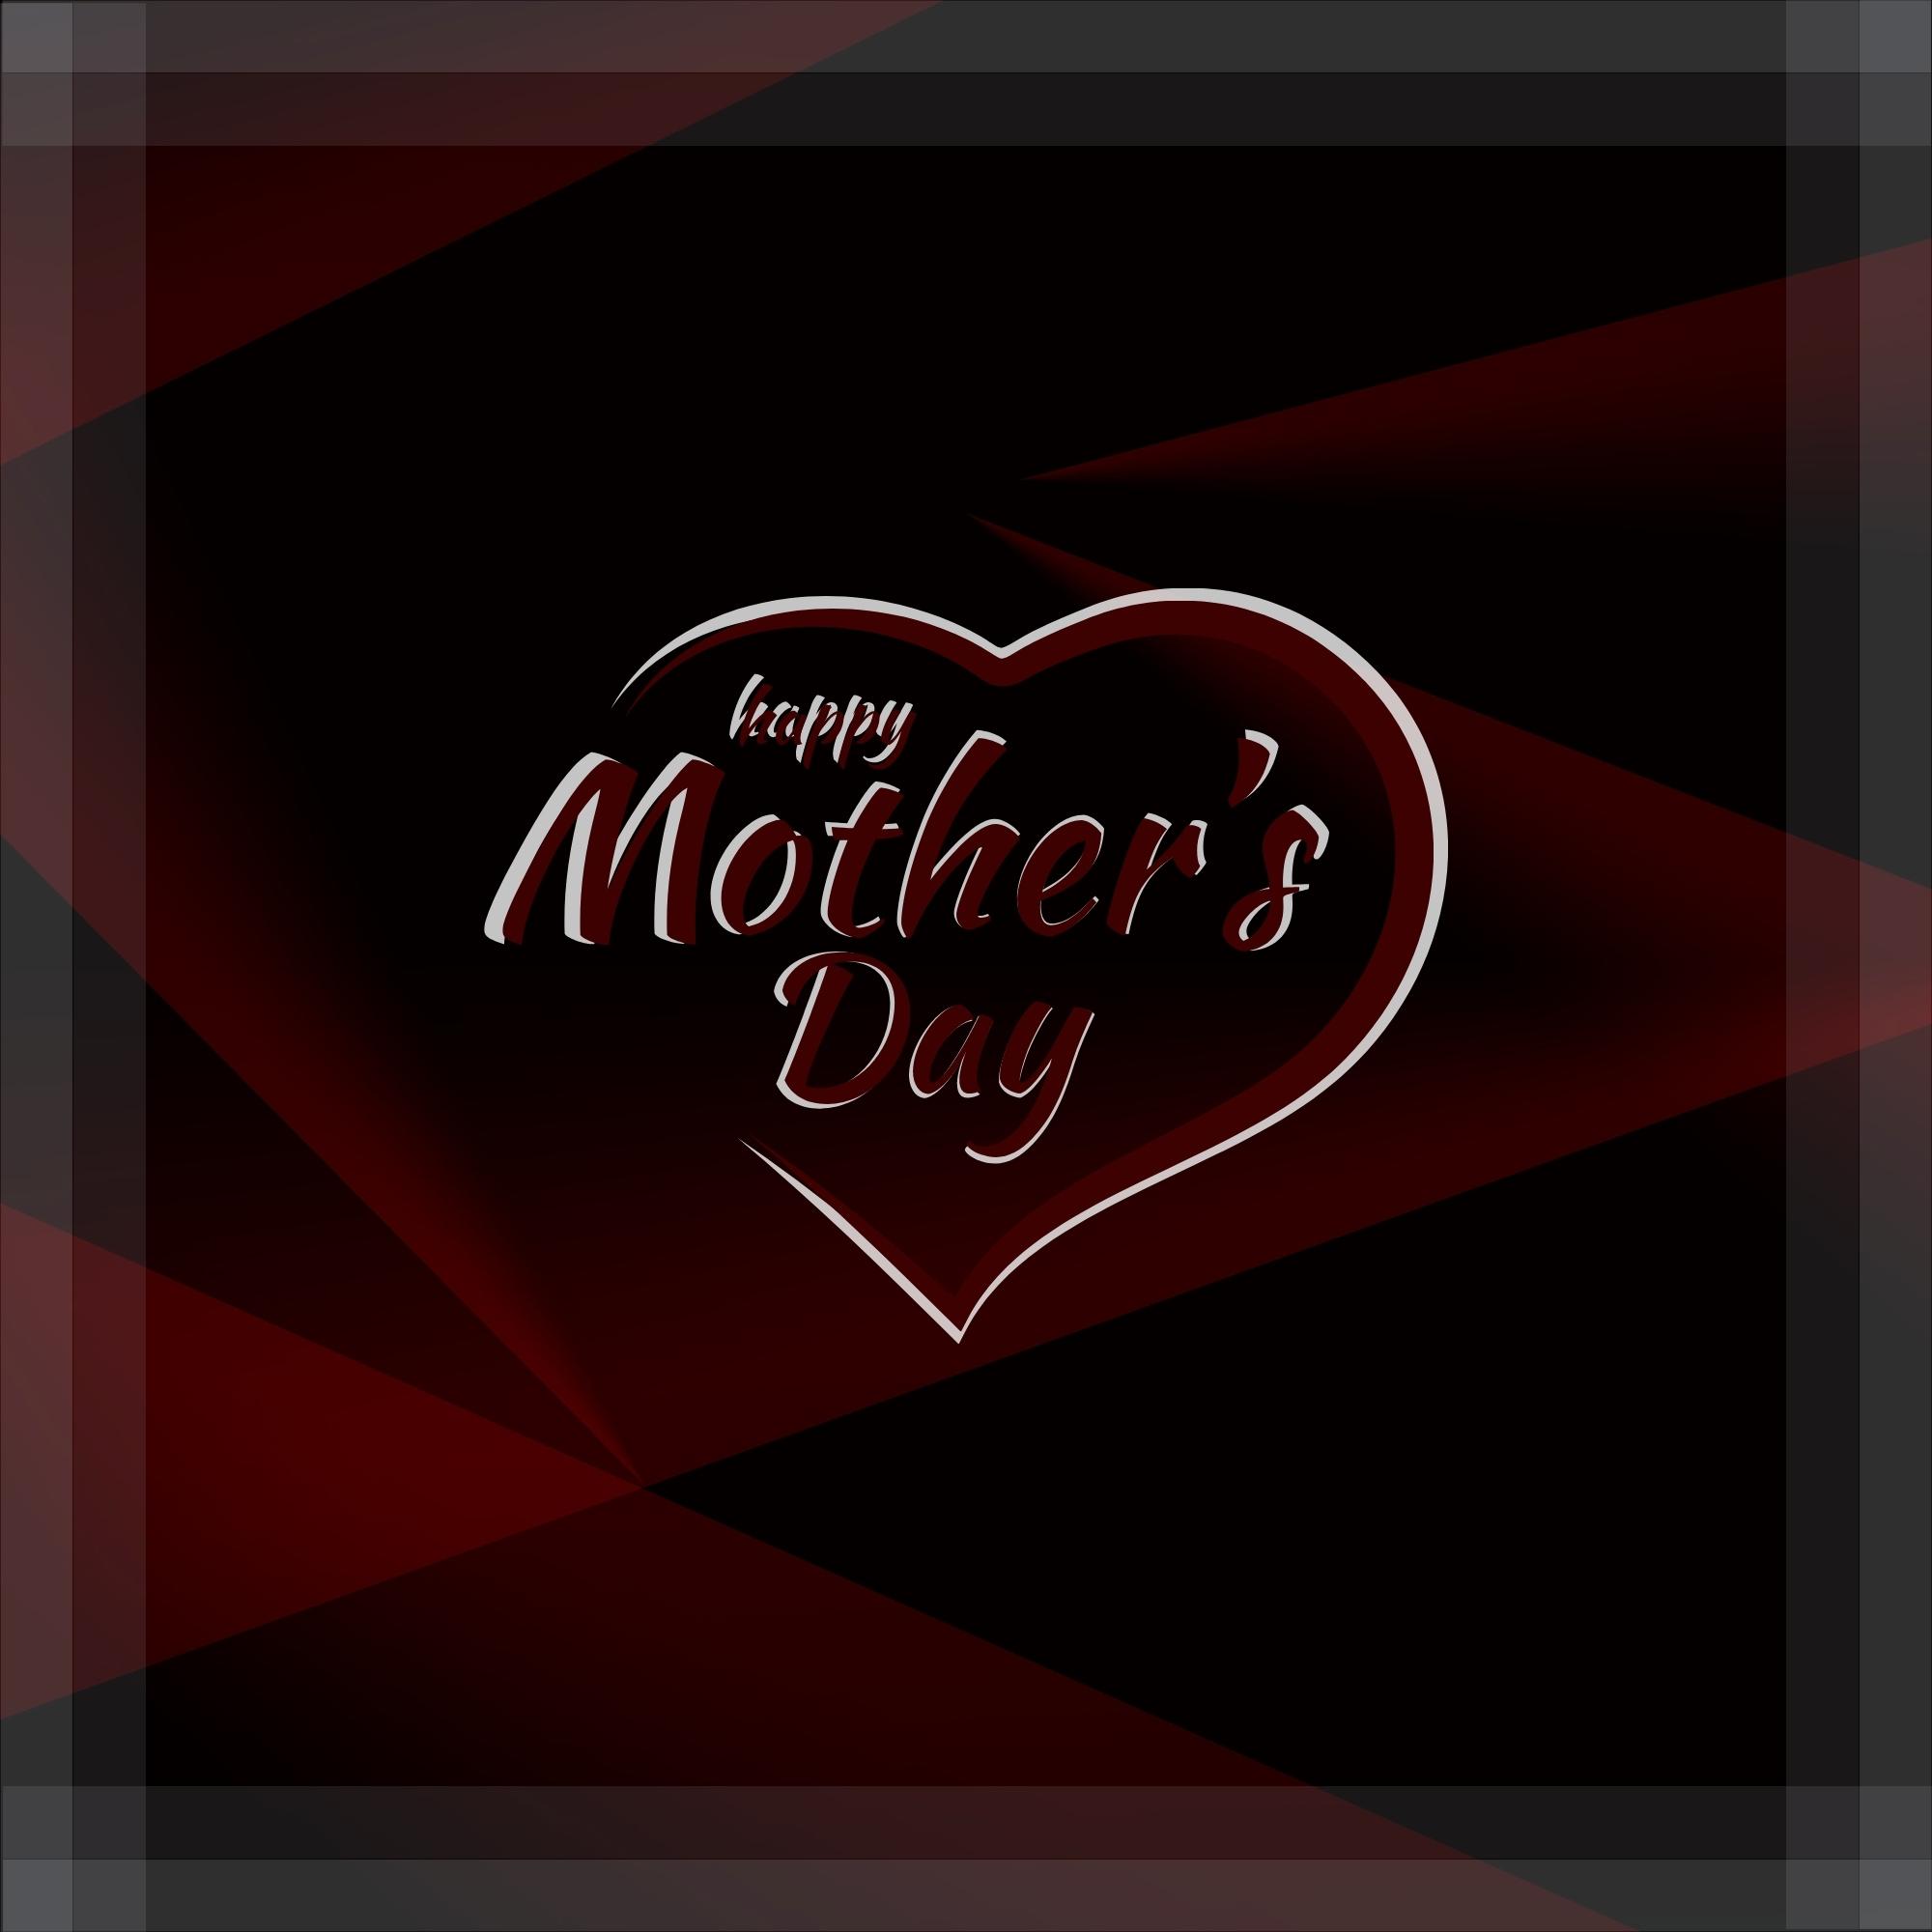 Happy Mothers Day Images | 992 | Free Download [8k,4k,Hd]